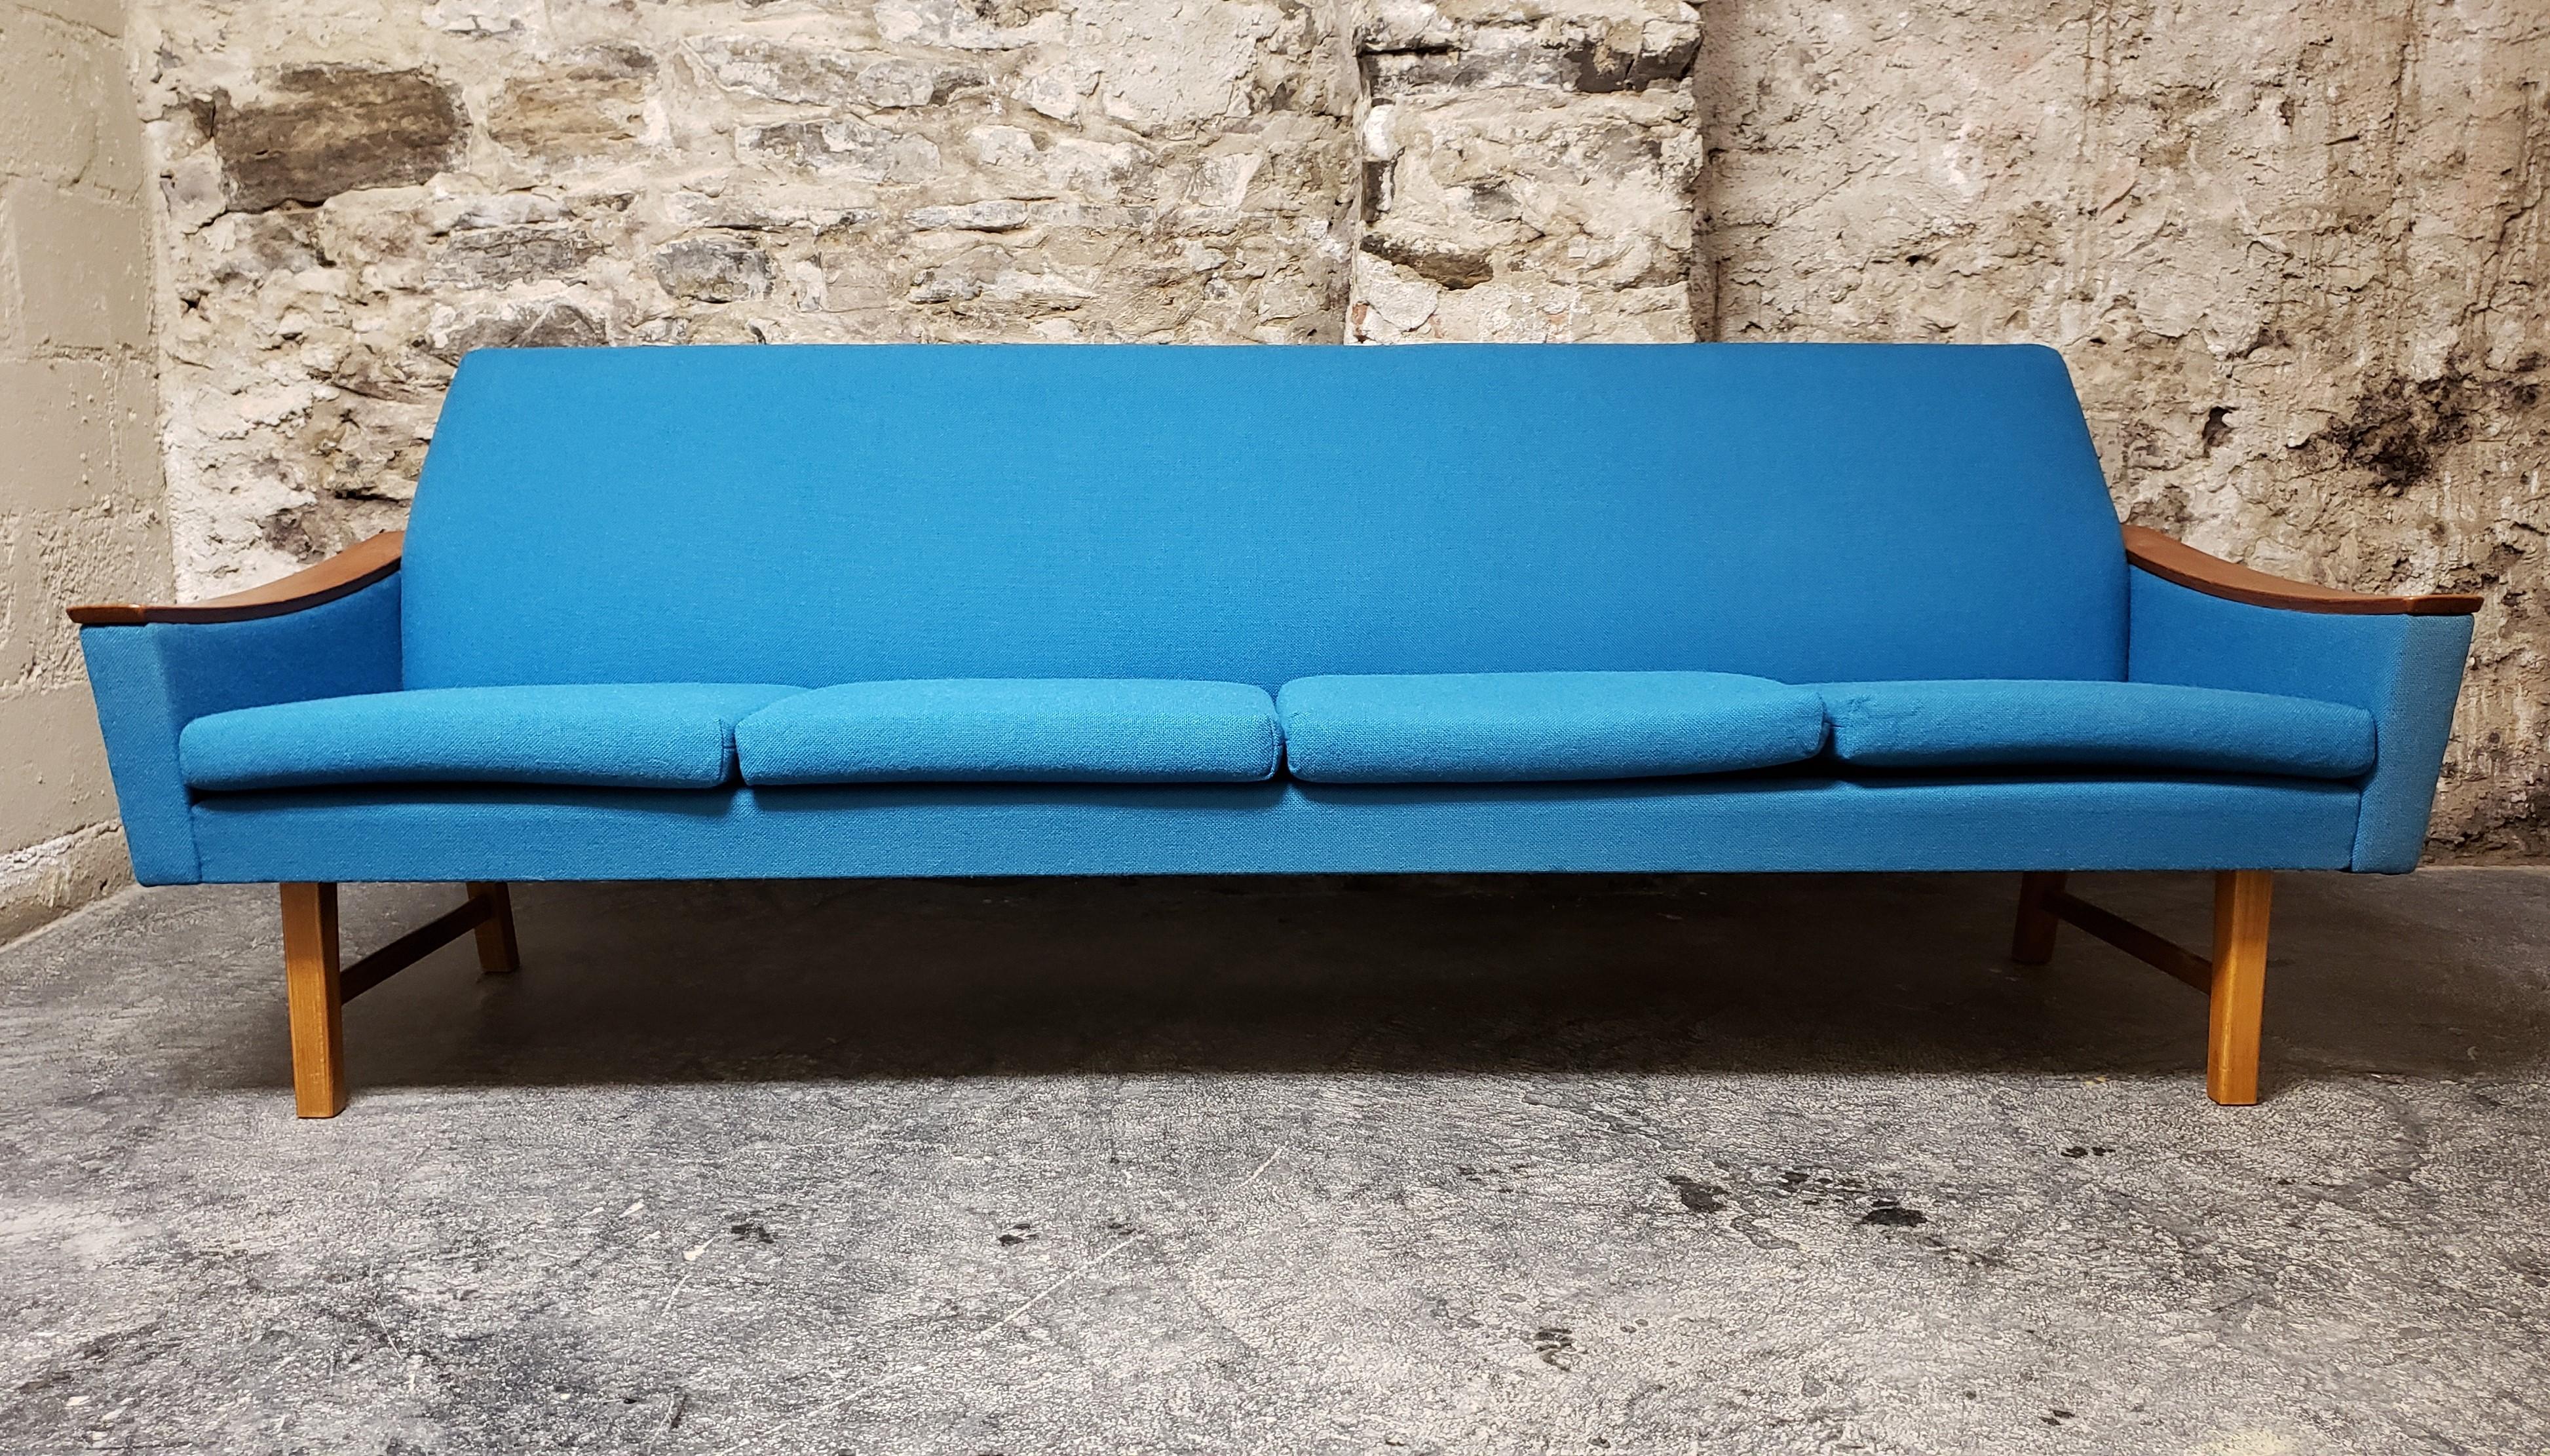 Superb Scandinavian Modern sofa designed by Oscar Lango and produced by P. I. Langlo’s Fabrikker, the father of the Norwegian modern furniture.